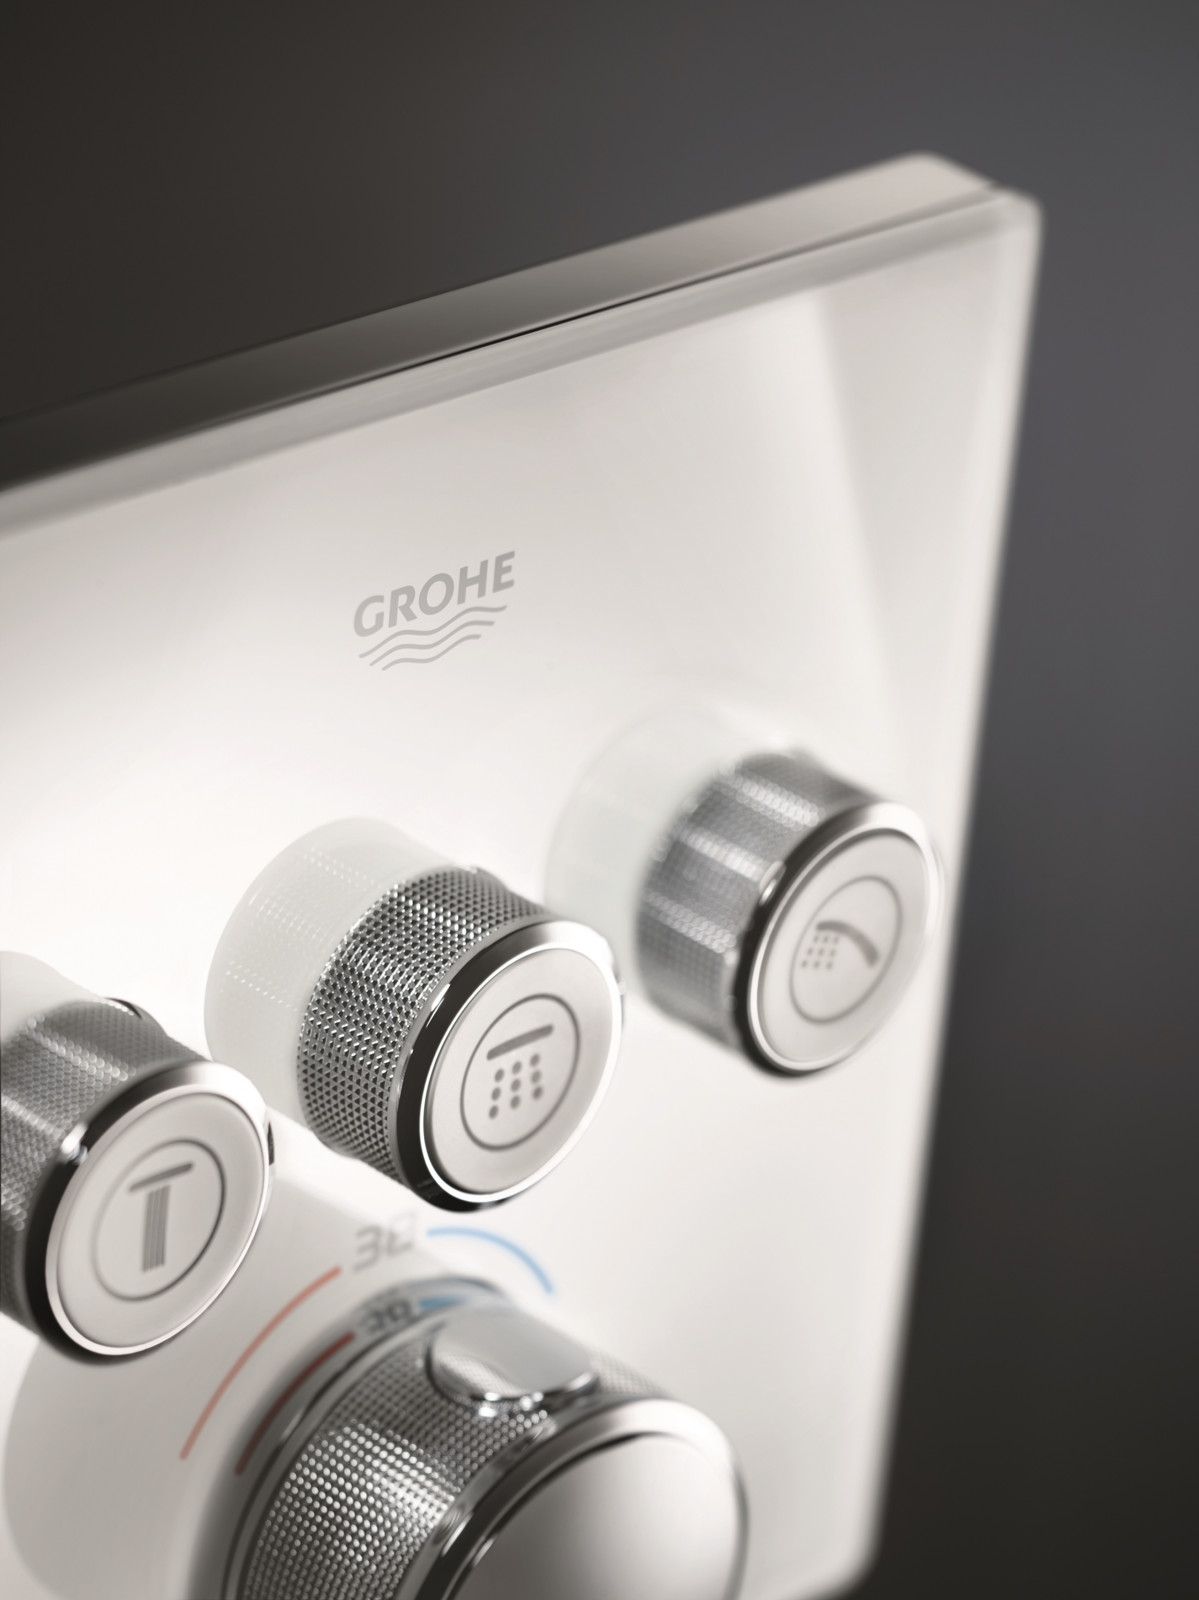 GROHE Grohtherm SmartControl (2)